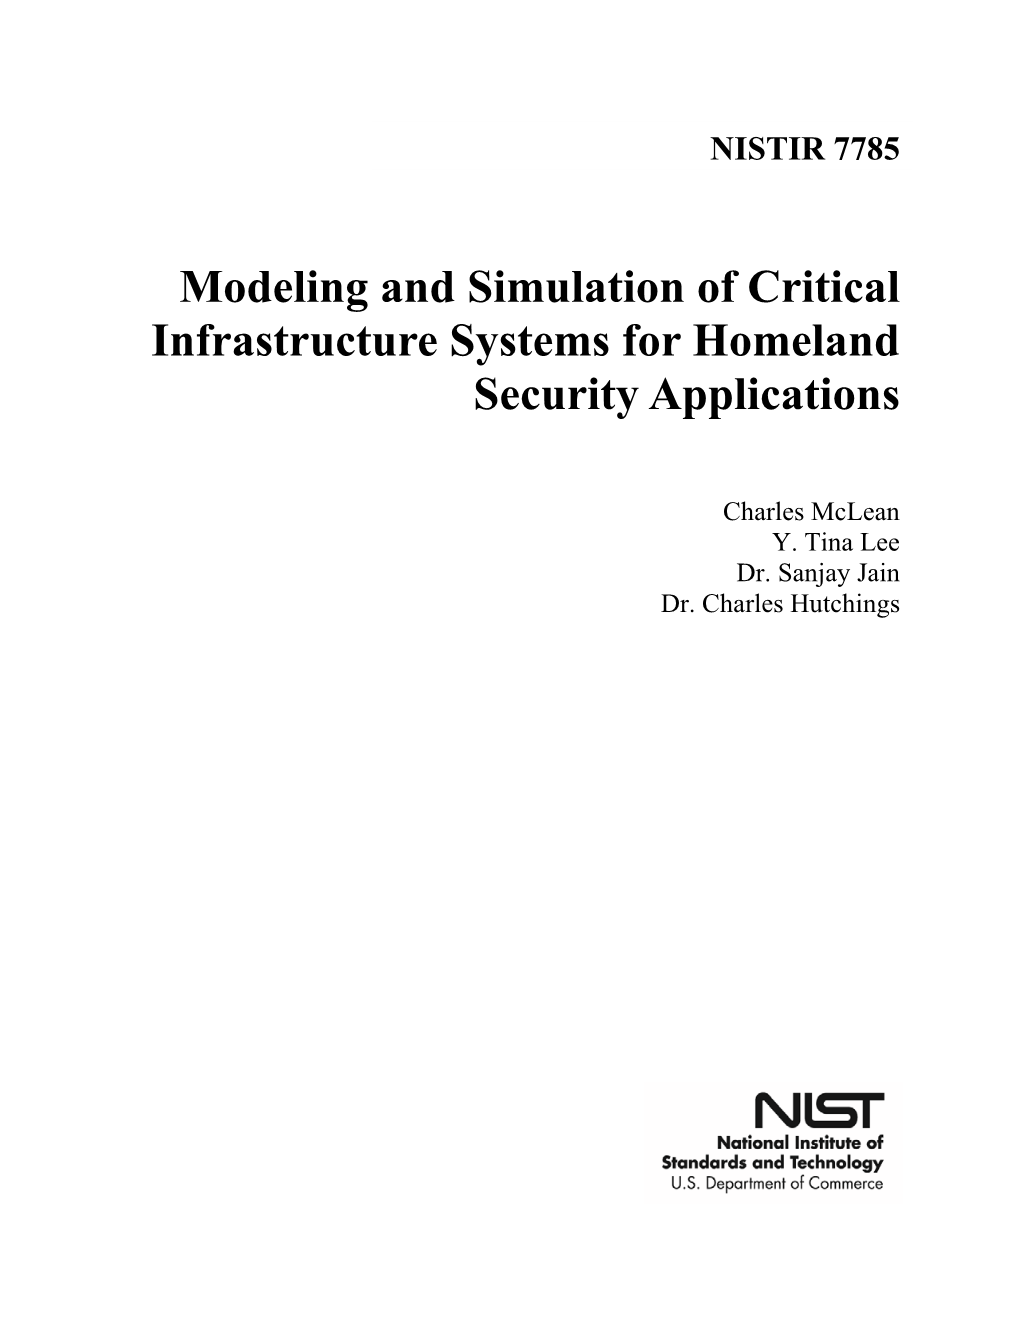 Modeling and Simulation of Critical Infrastructure Systems for Homeland Security Applications